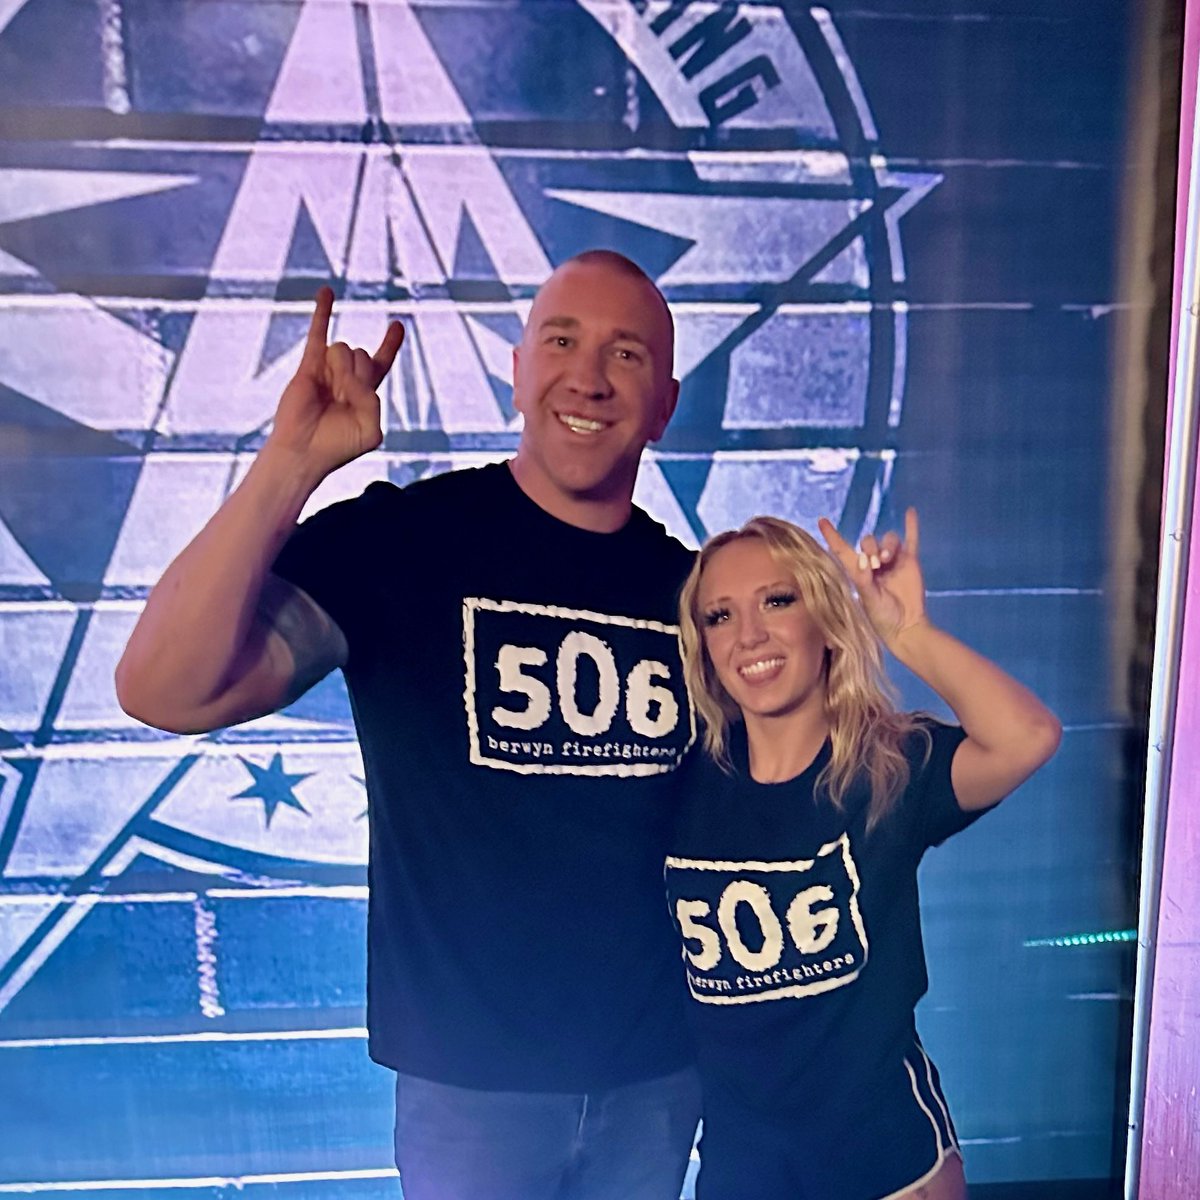 To all of our favorite @AAWPro wrestlers that have worn our 506 swag, we wanted to wish you all good luck at “ART OF WAR” in Berwyn tonight! While we will not be attending tonight, the 506 will be attending the Jim Lynam Tournament in October. #Local506Cares 👍♥️👨‍🚒 #AAW 👊